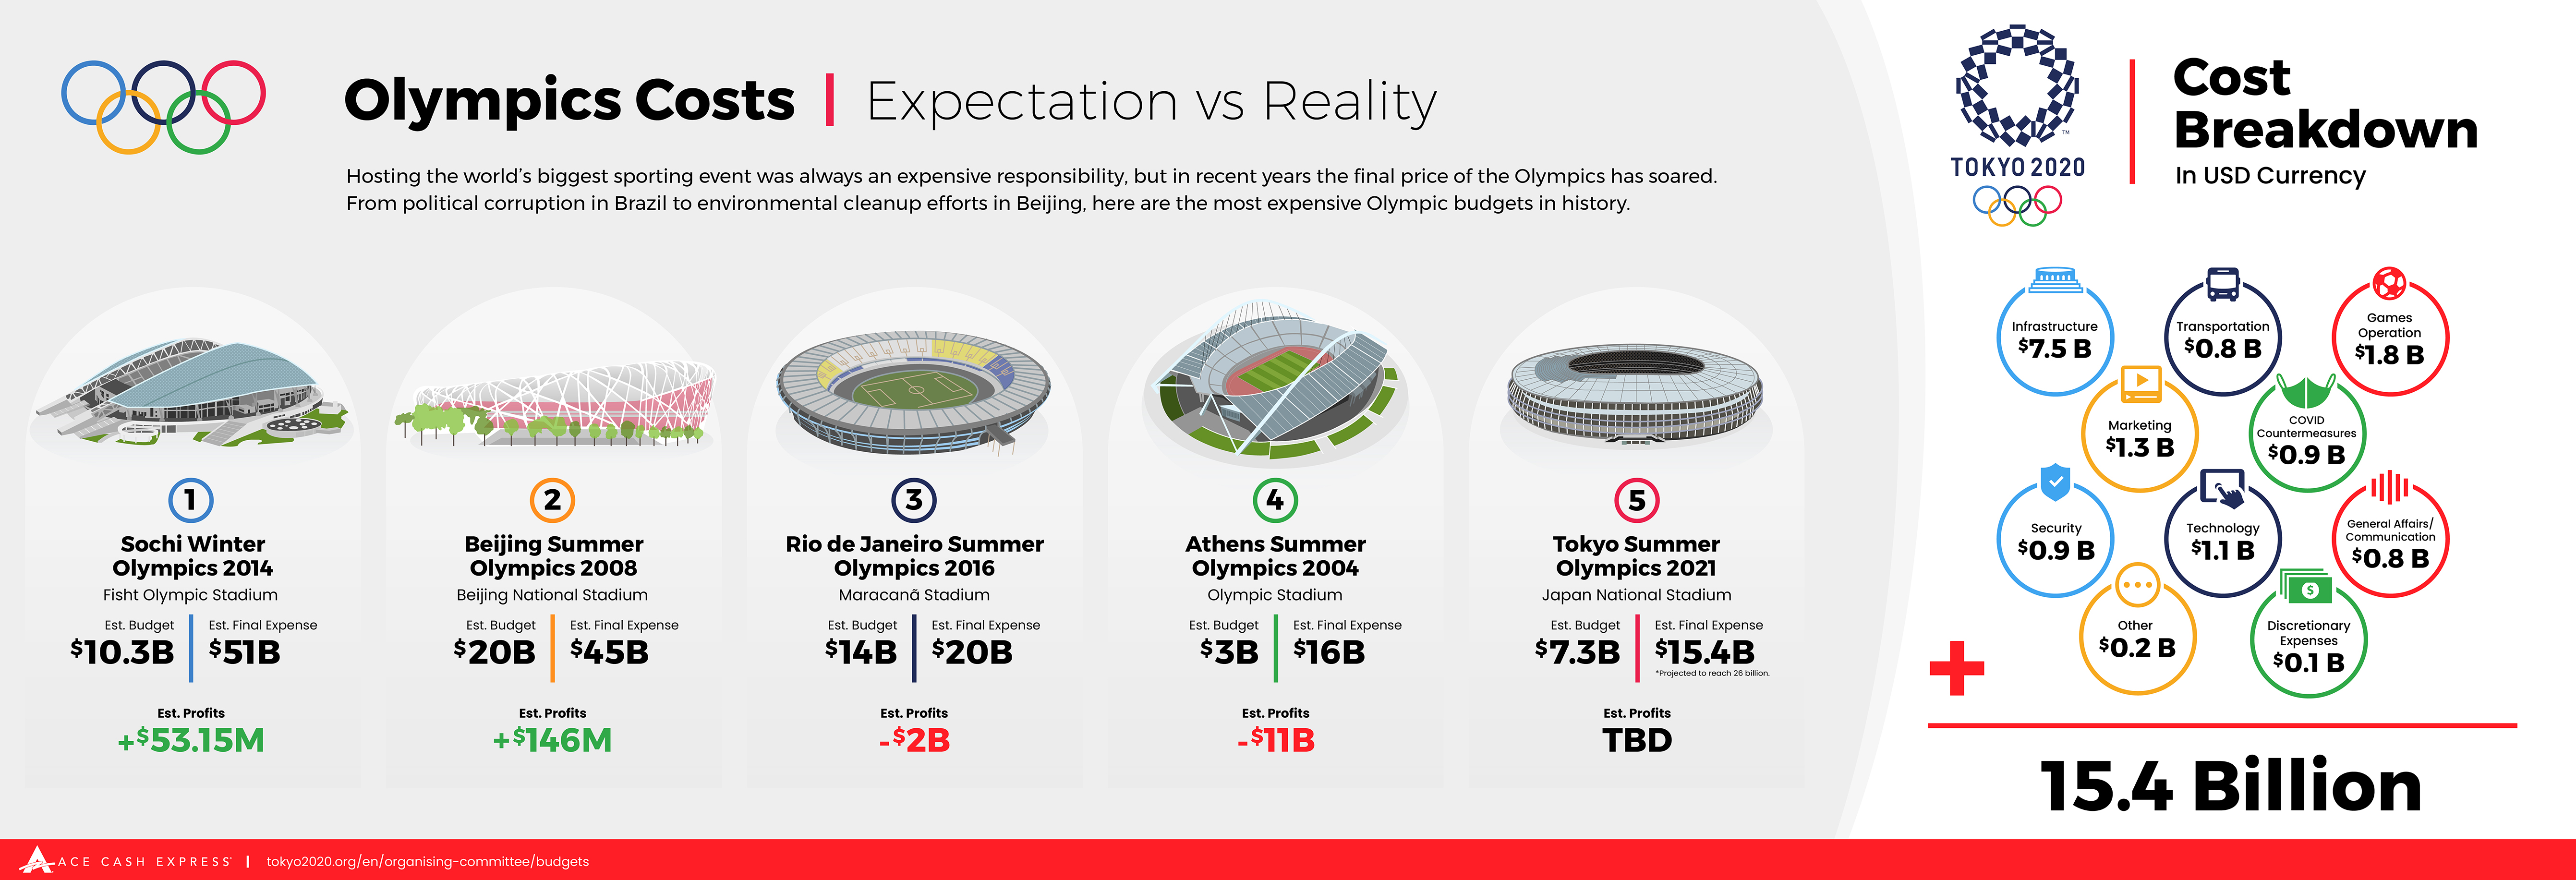 Going for Gold or Going Broke? The Economic Cost of Hosting the Olympics Infographic